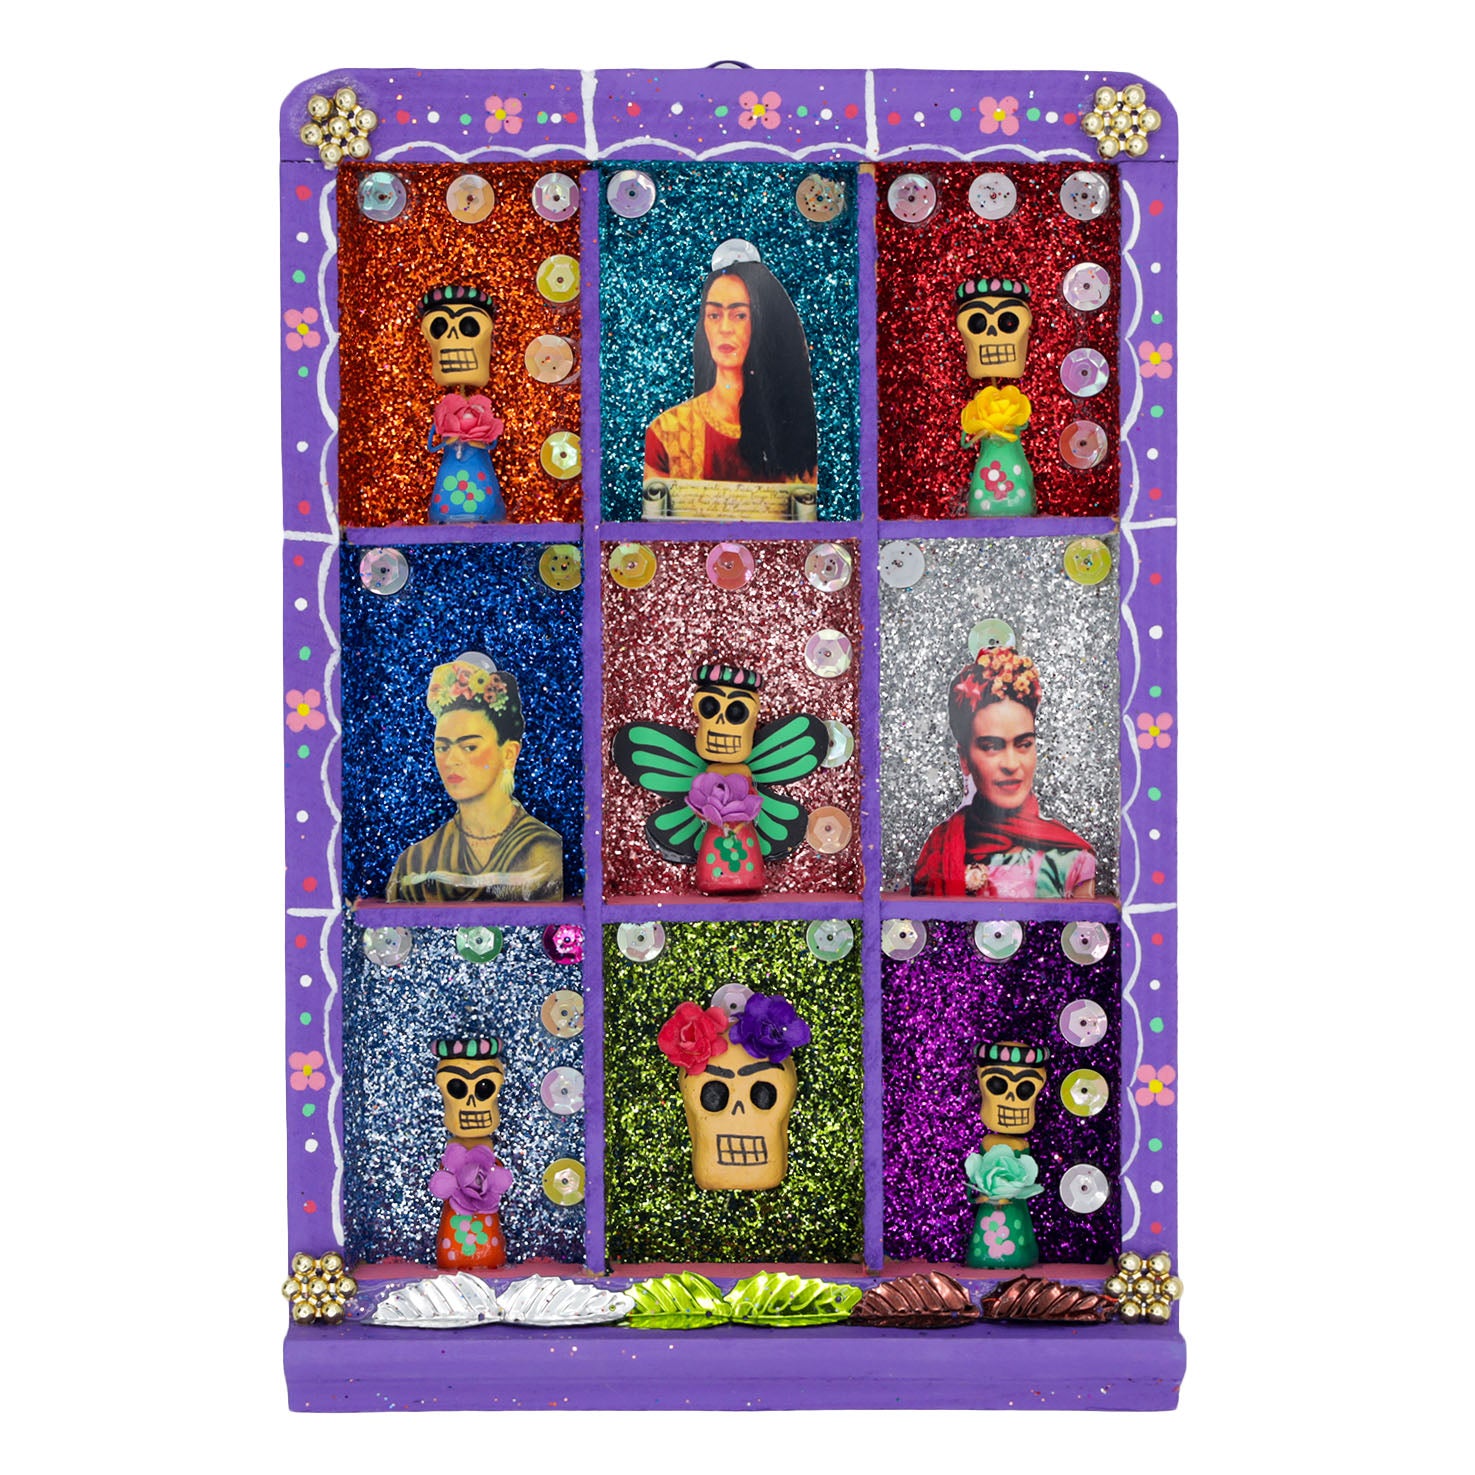 Frida Kahlo Day of the Dead Shadow Box